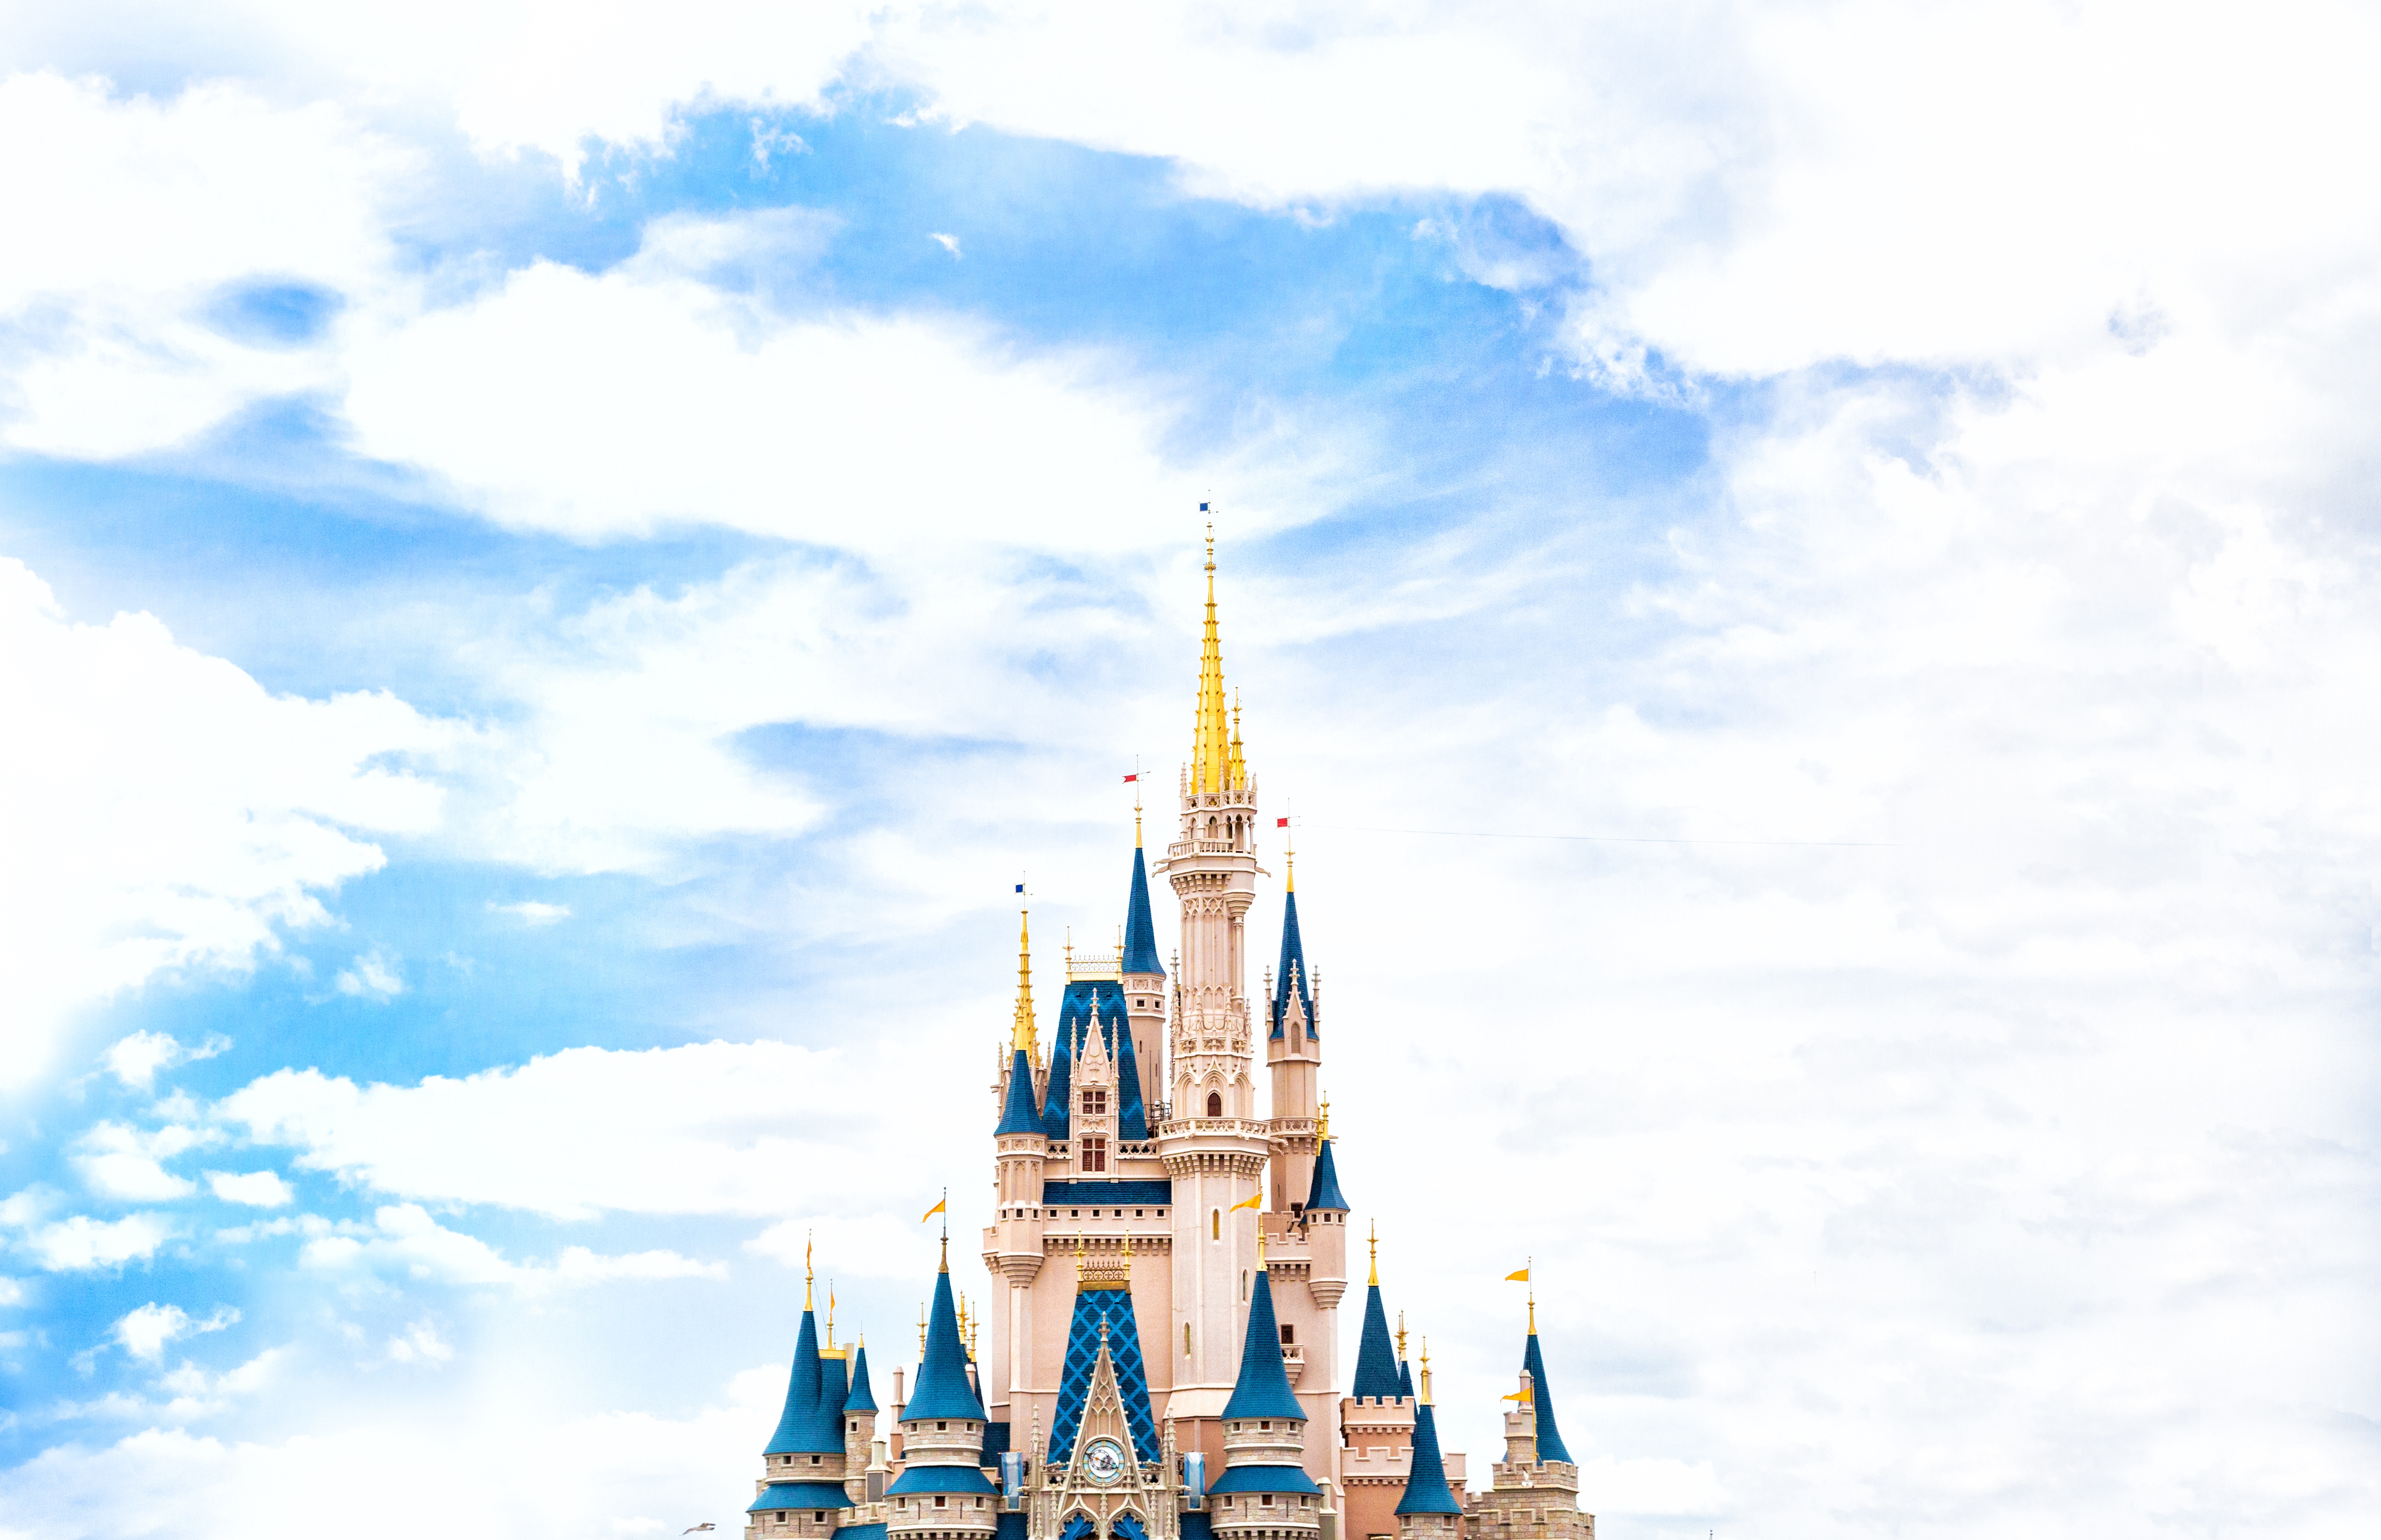 17 Ways to Save Money On A Disney World Vacation & Not Feel Like You're Missing Out Is it possible to budget for Disney World without missing out? Yes! Saving money on a Disney World vacation is easy with these tips and tricks from a life long Disney traveling mother! I’ve put together a list of my best tips and money saving tricks for you to plan your family Disney vacation so you can save money and have fun without missing out on a thing! #DisneyWorld #DisneyWorldTips